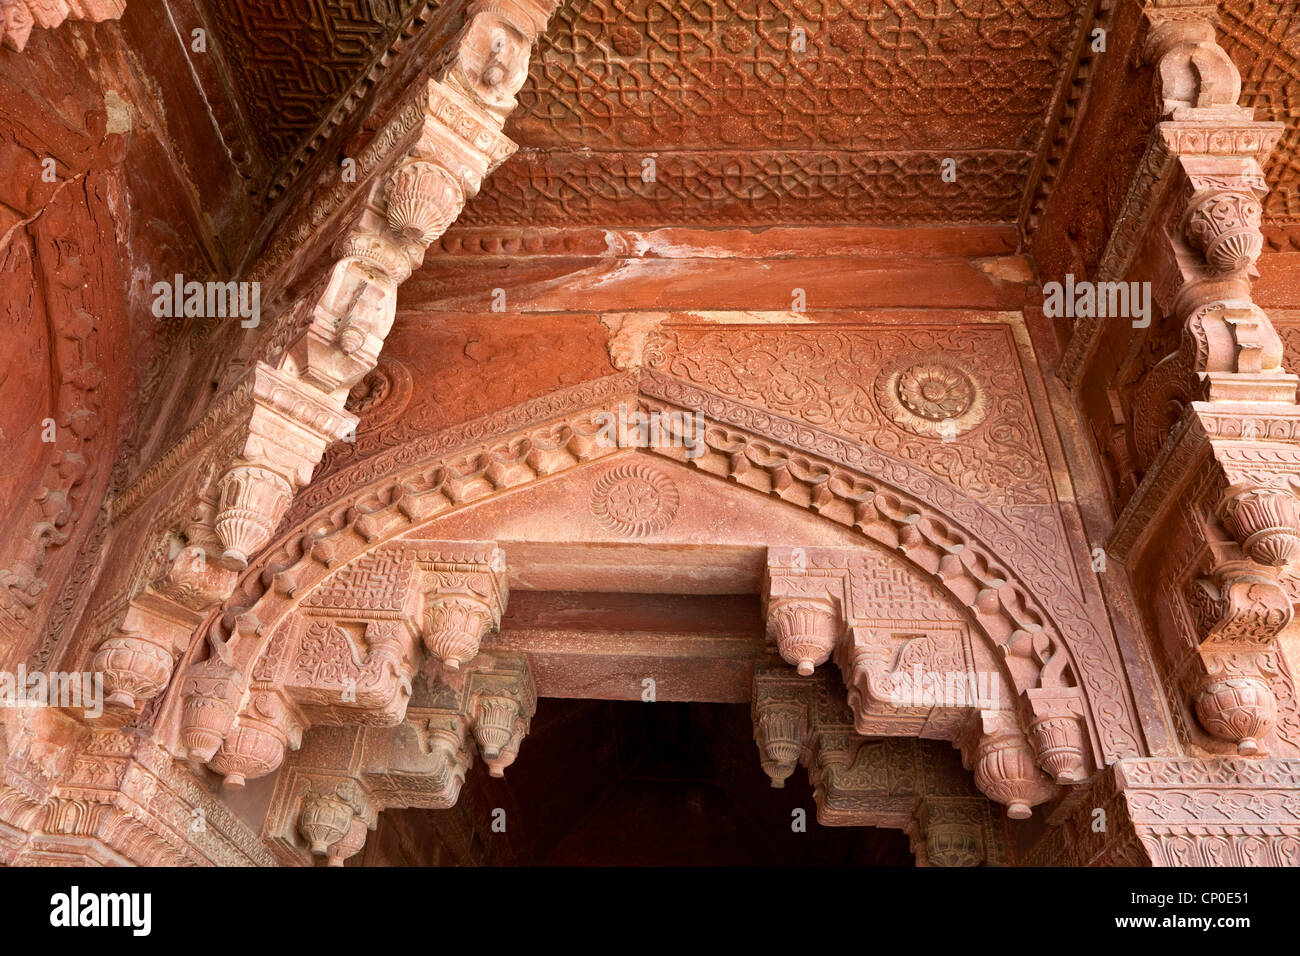 Fatehpur Sikri, India. Doorway Showing Combined Hindu and Islamic Architectural Influences, Birbal's Palace. Stock Photo